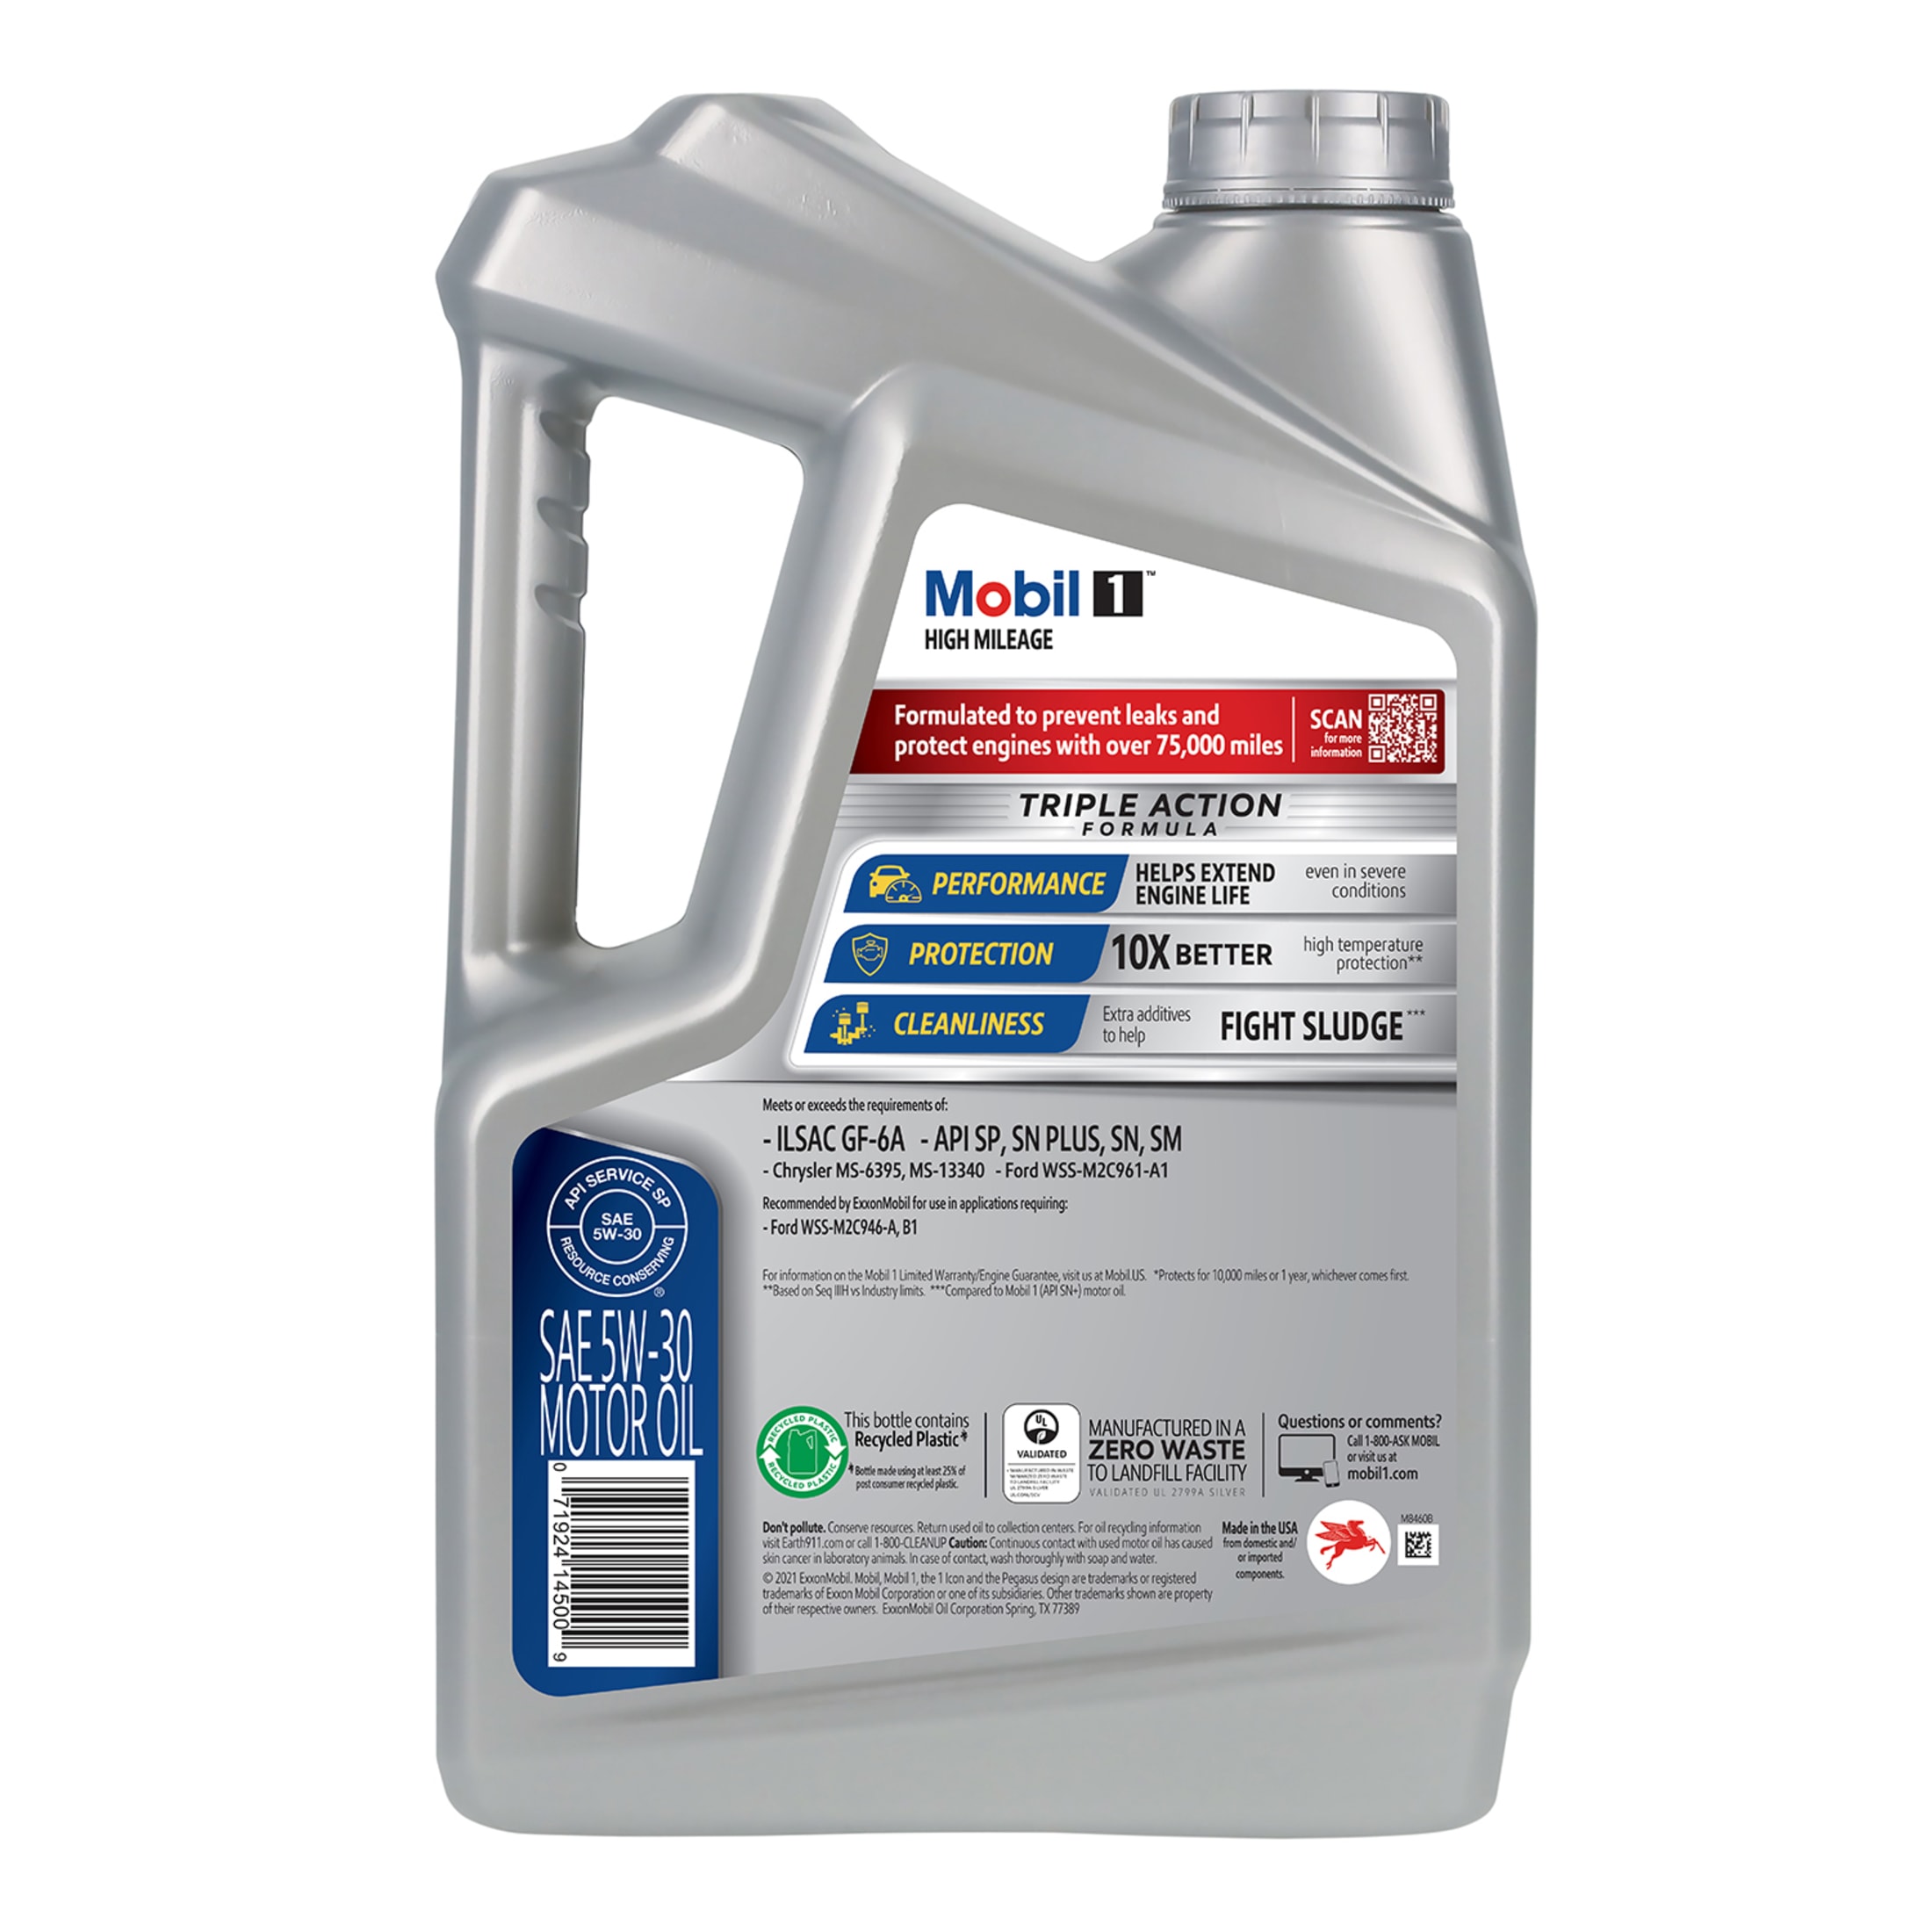 Mobil 1 High Mileage Full Synthetic Motor Oil 5W-30, 5 Quart - image 4 of 9